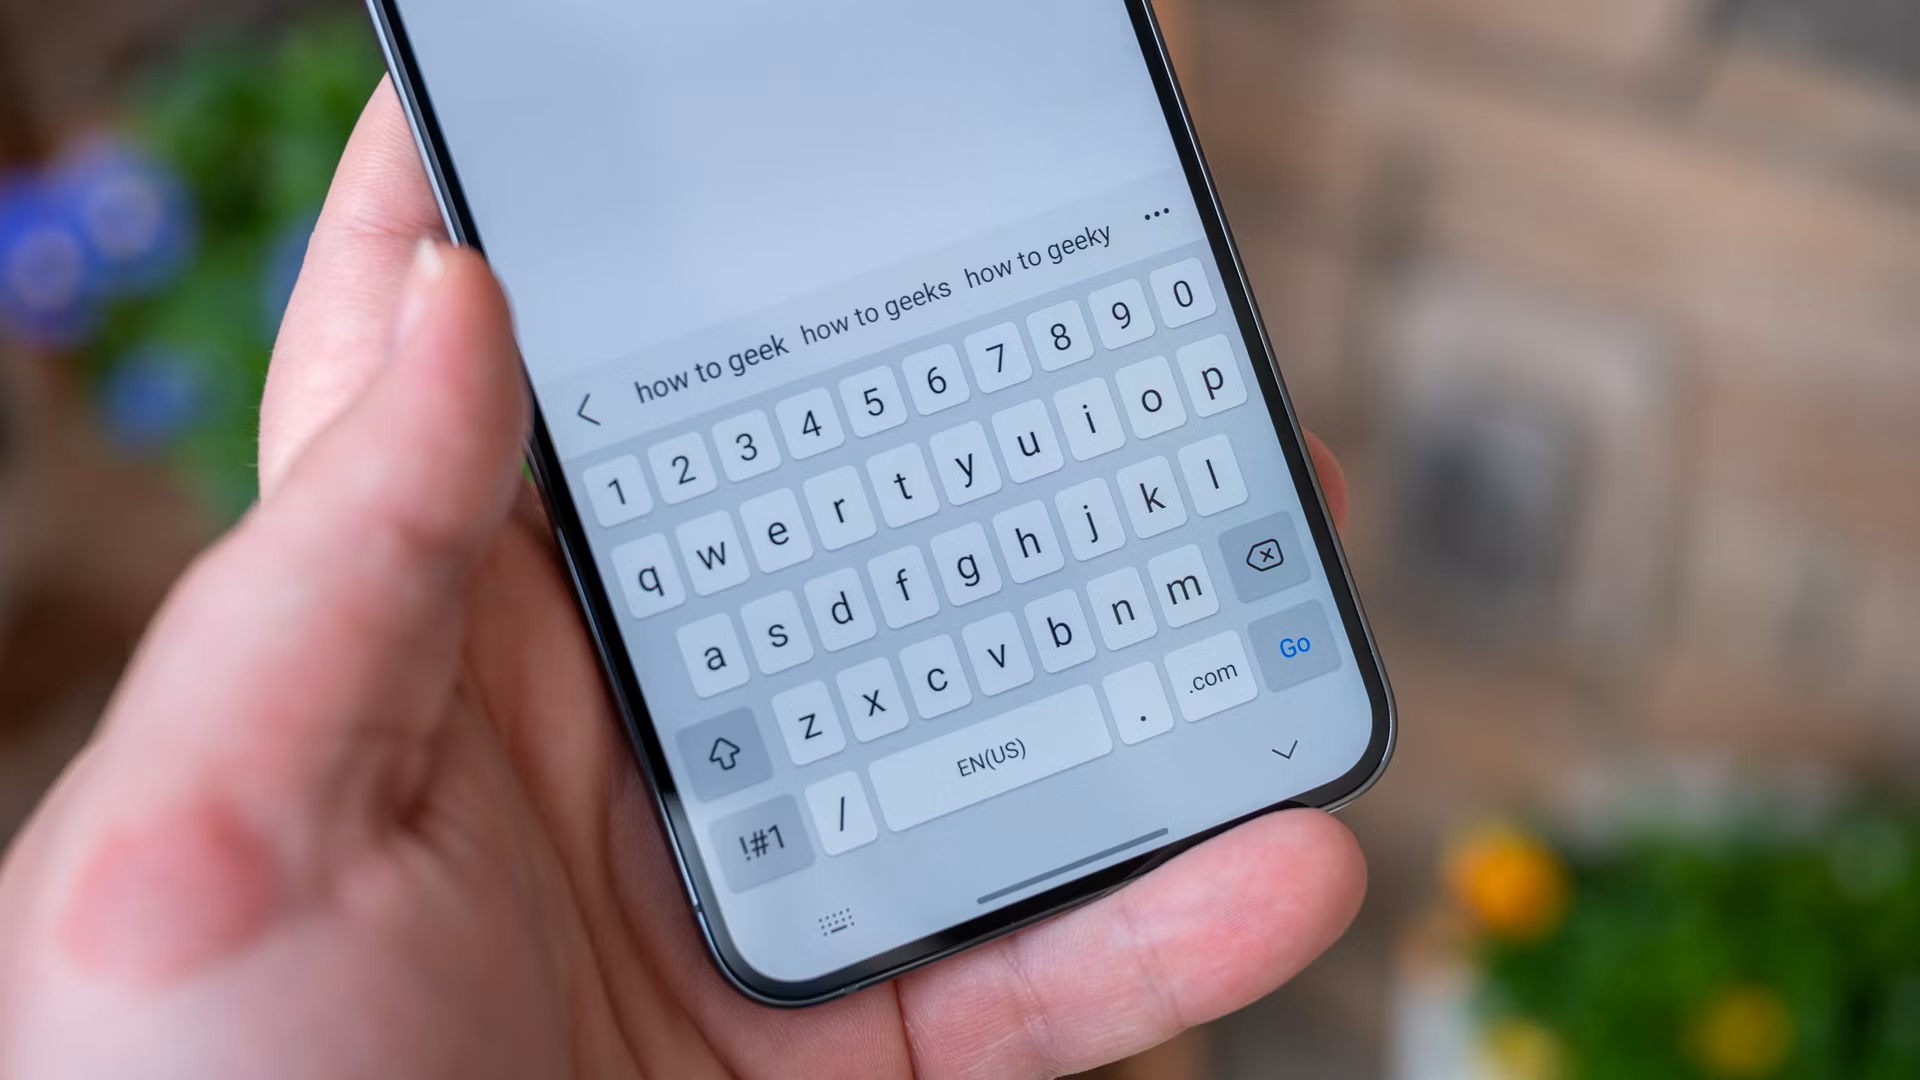 Samsung removes popular keyboard extensions: Grammarly, Spotify and YouTube are no longer available